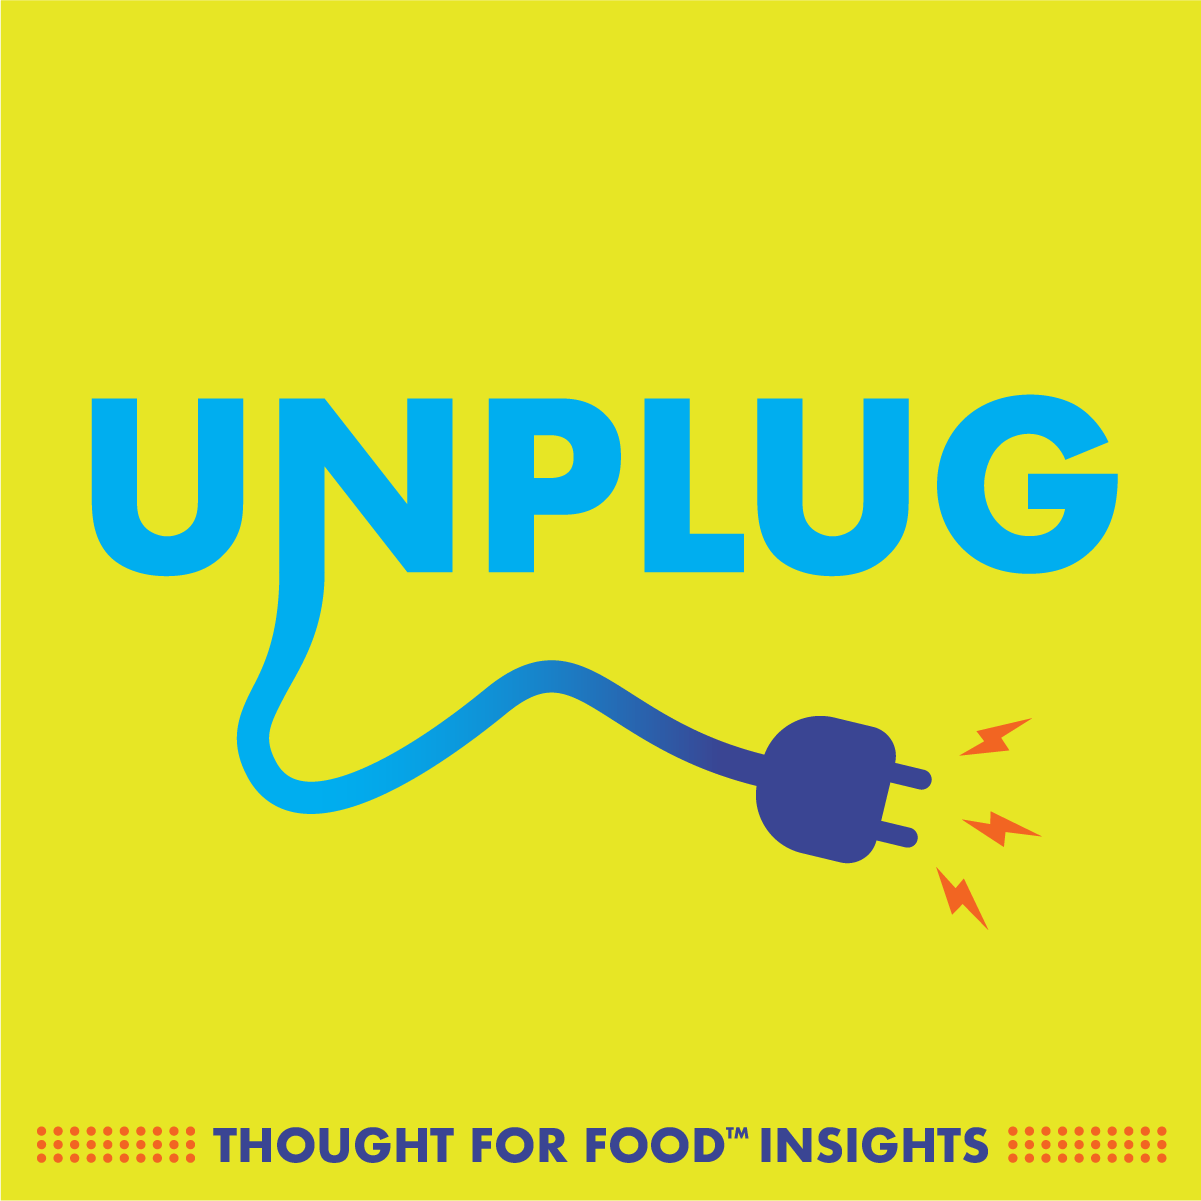 illustration of the word Unplug with an unplugged cord dangling below